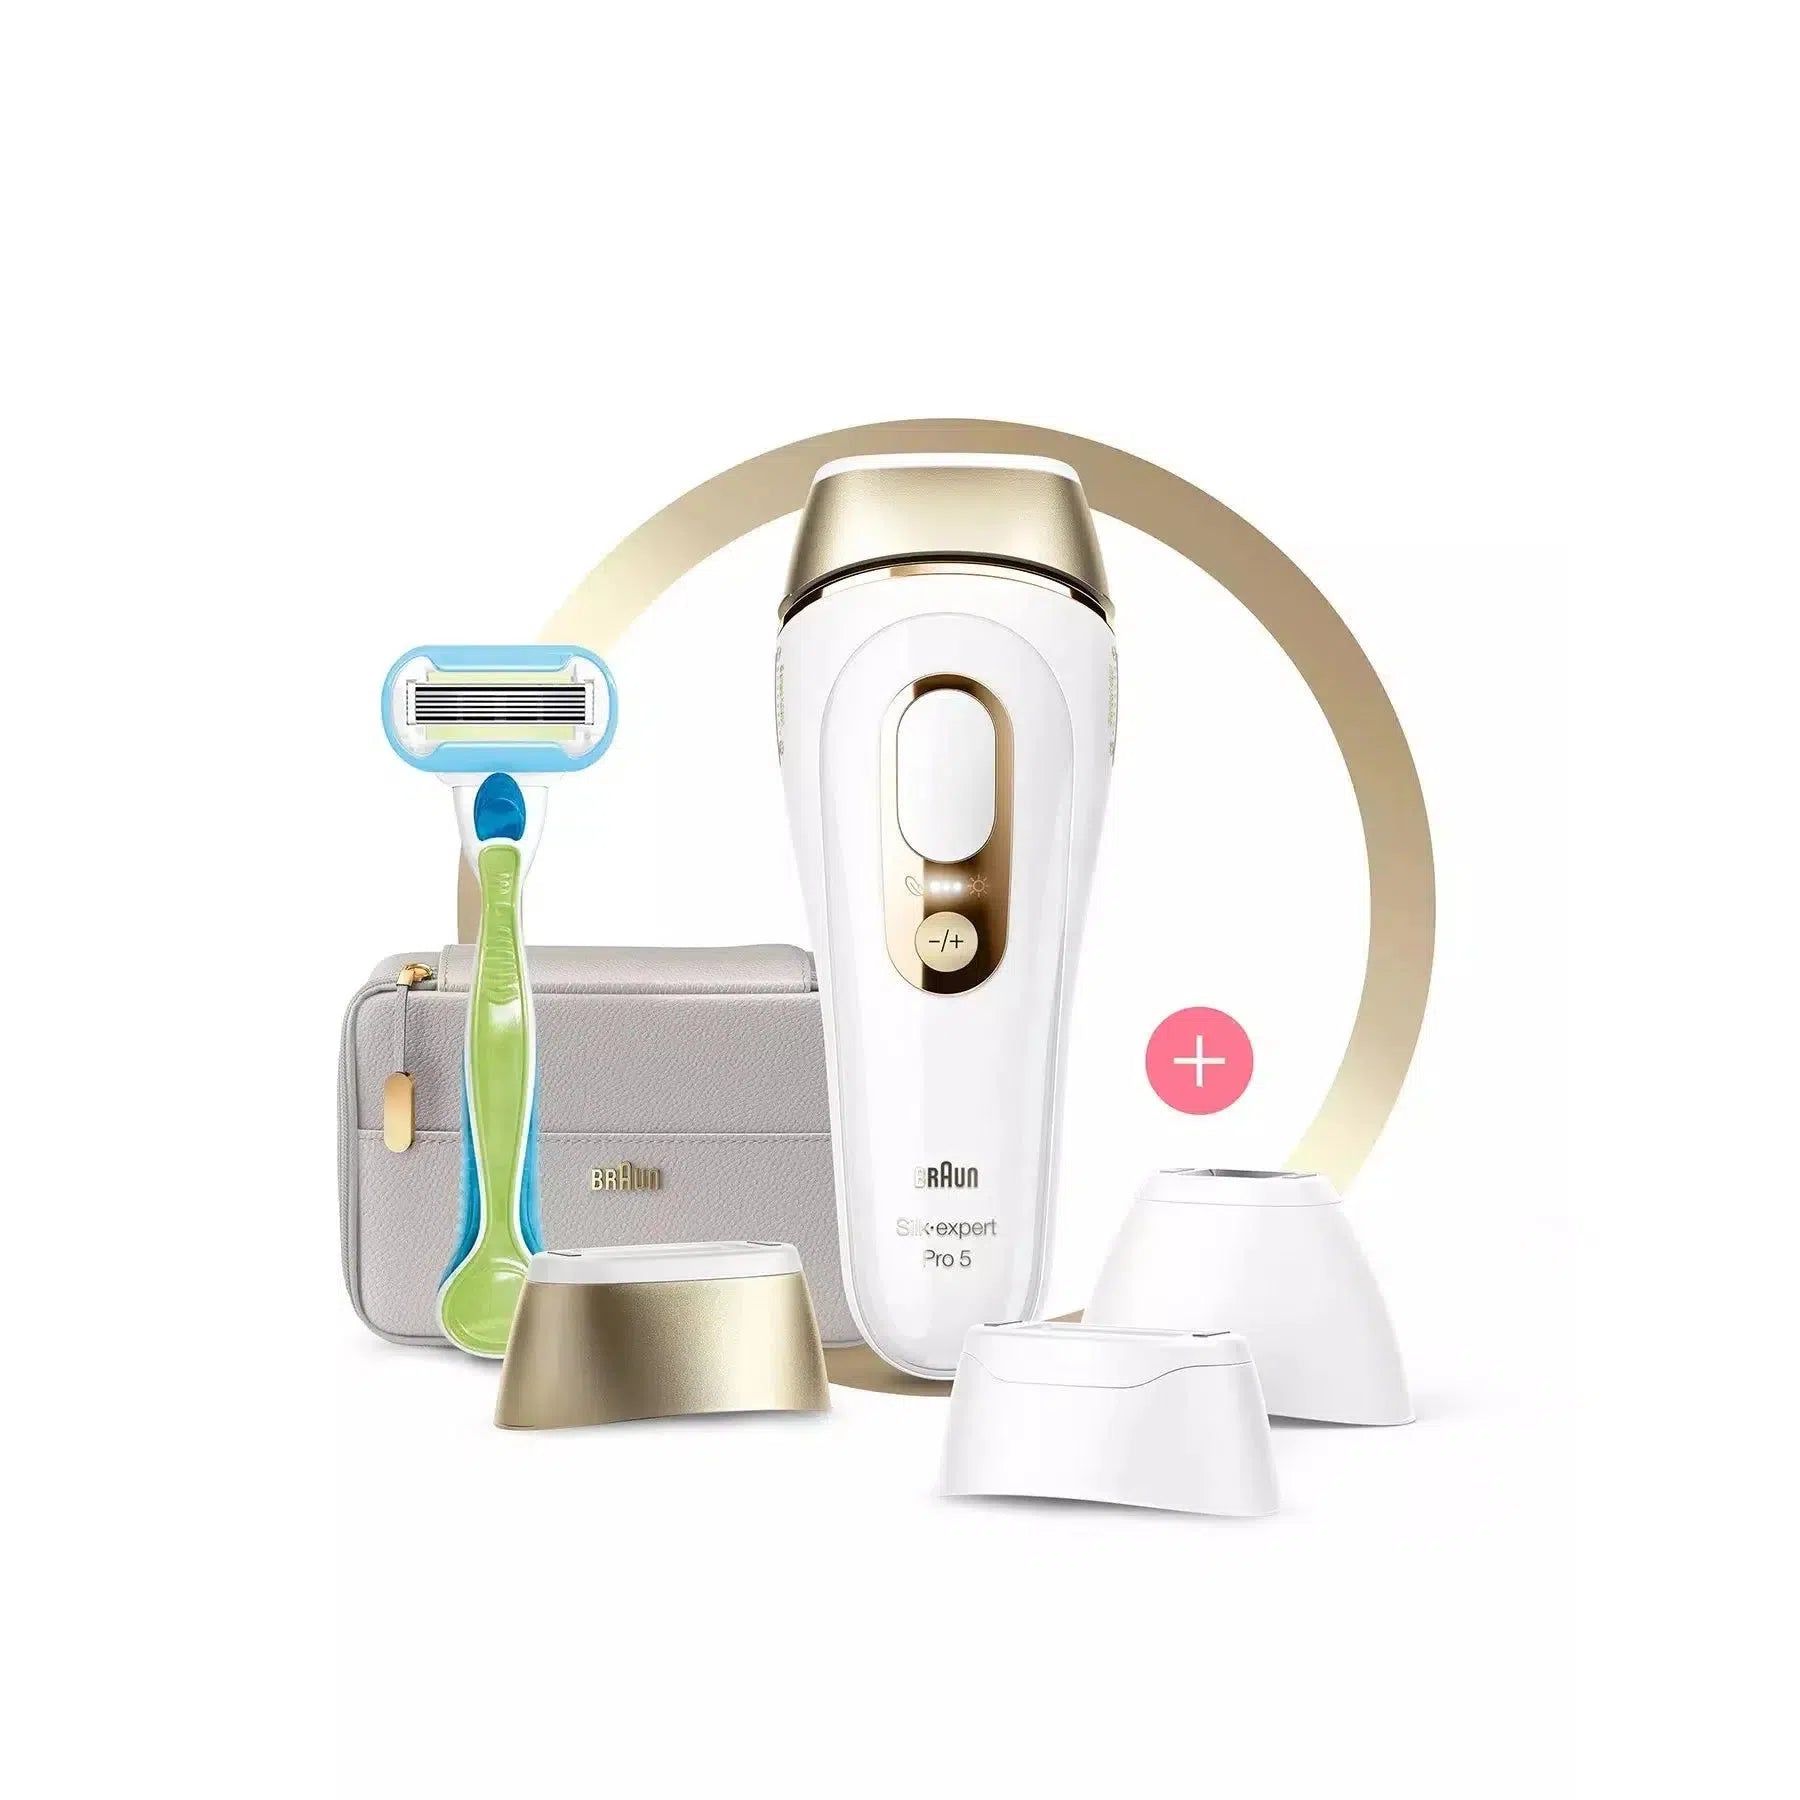 Braun Silk-expert Pro Removal precision System 5 with PL5257 Hair IPL